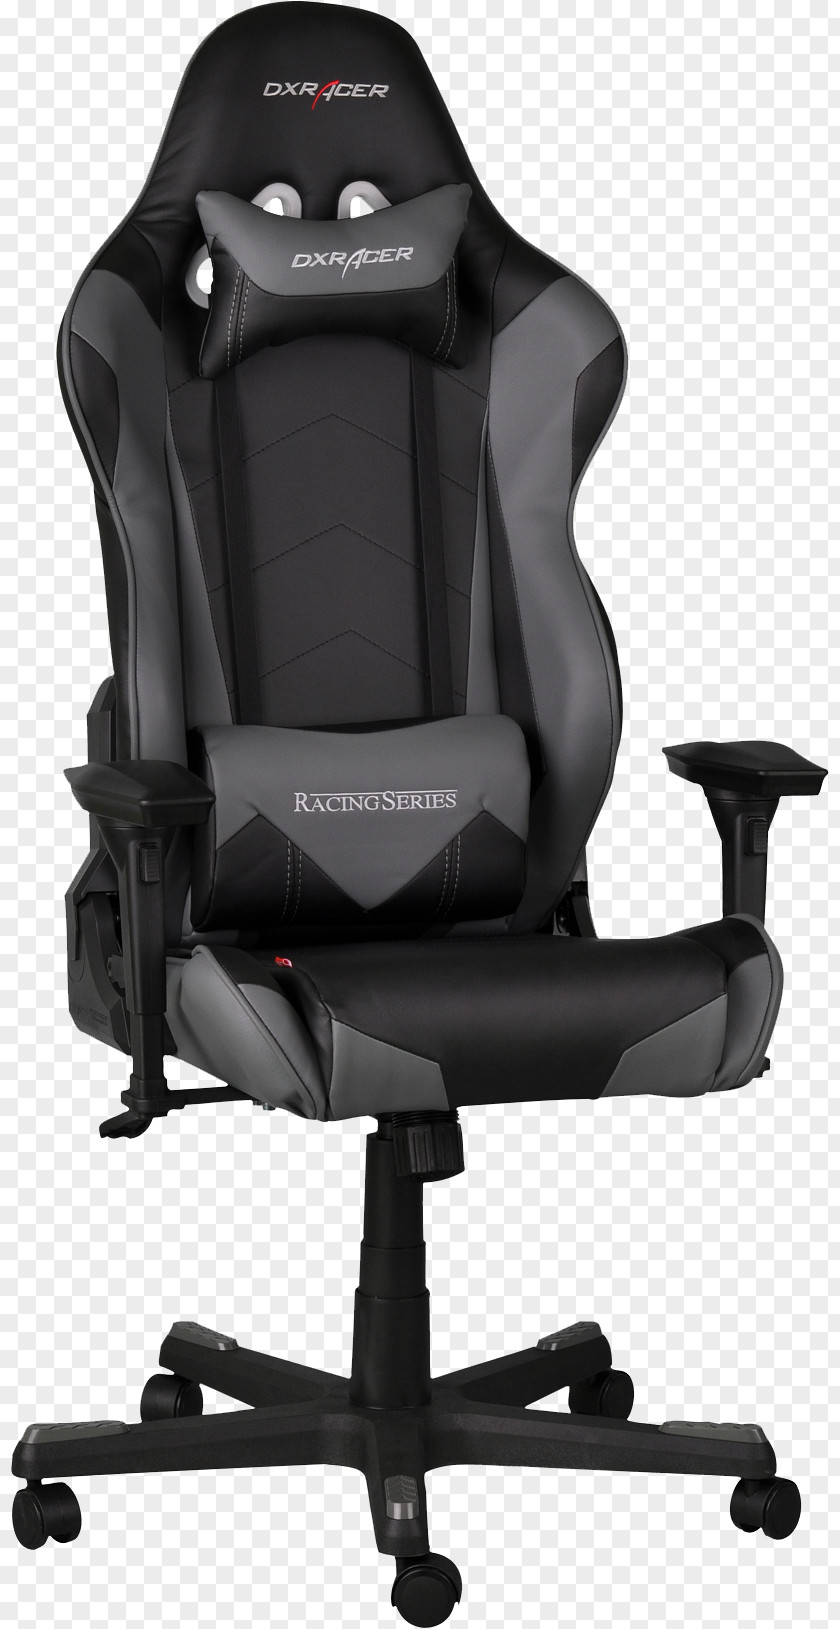 Chair Office & Desk Chairs Gaming Swivel DXRacer PNG